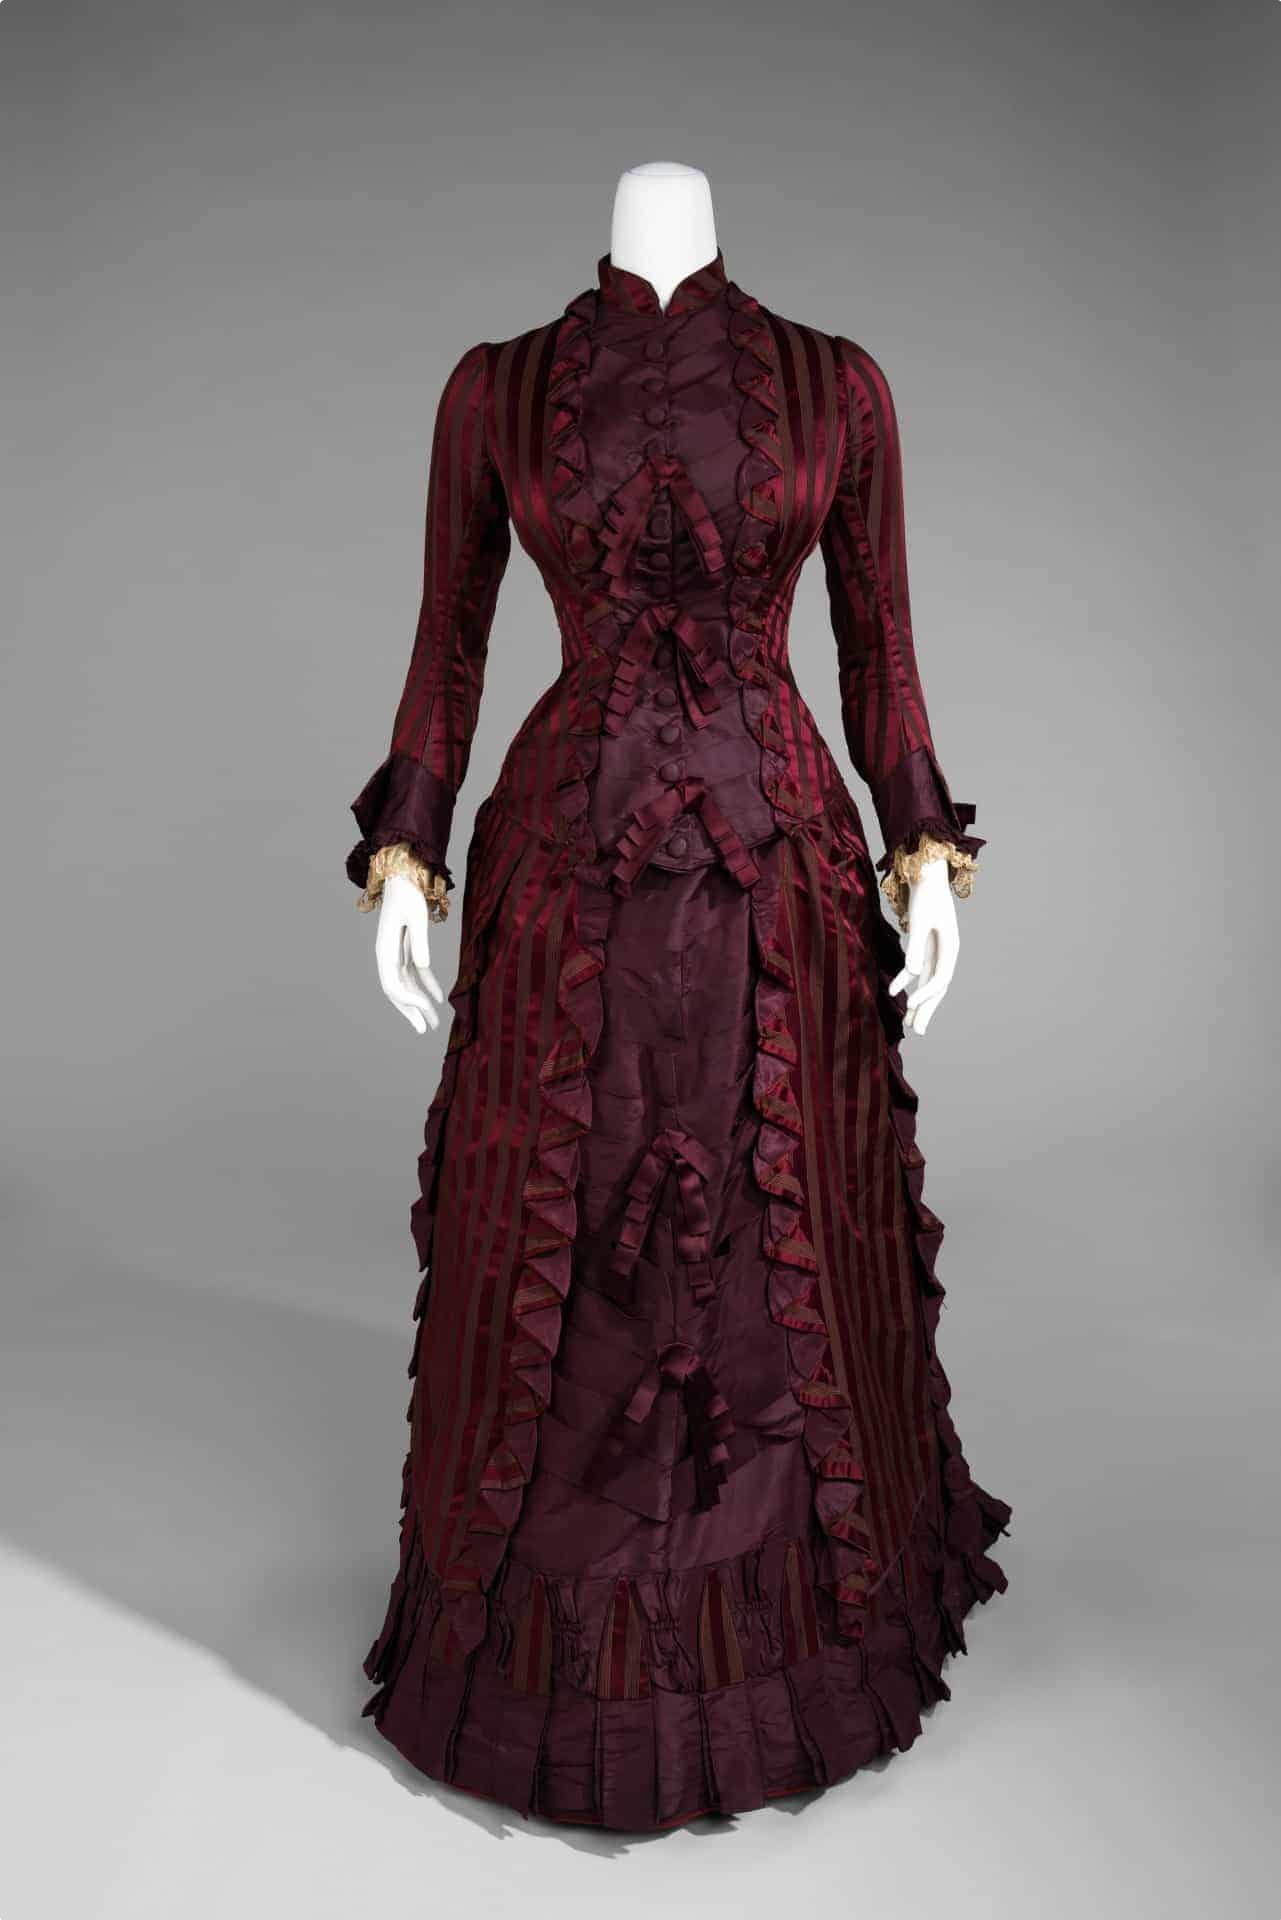 What was the Victorian style of fashion?